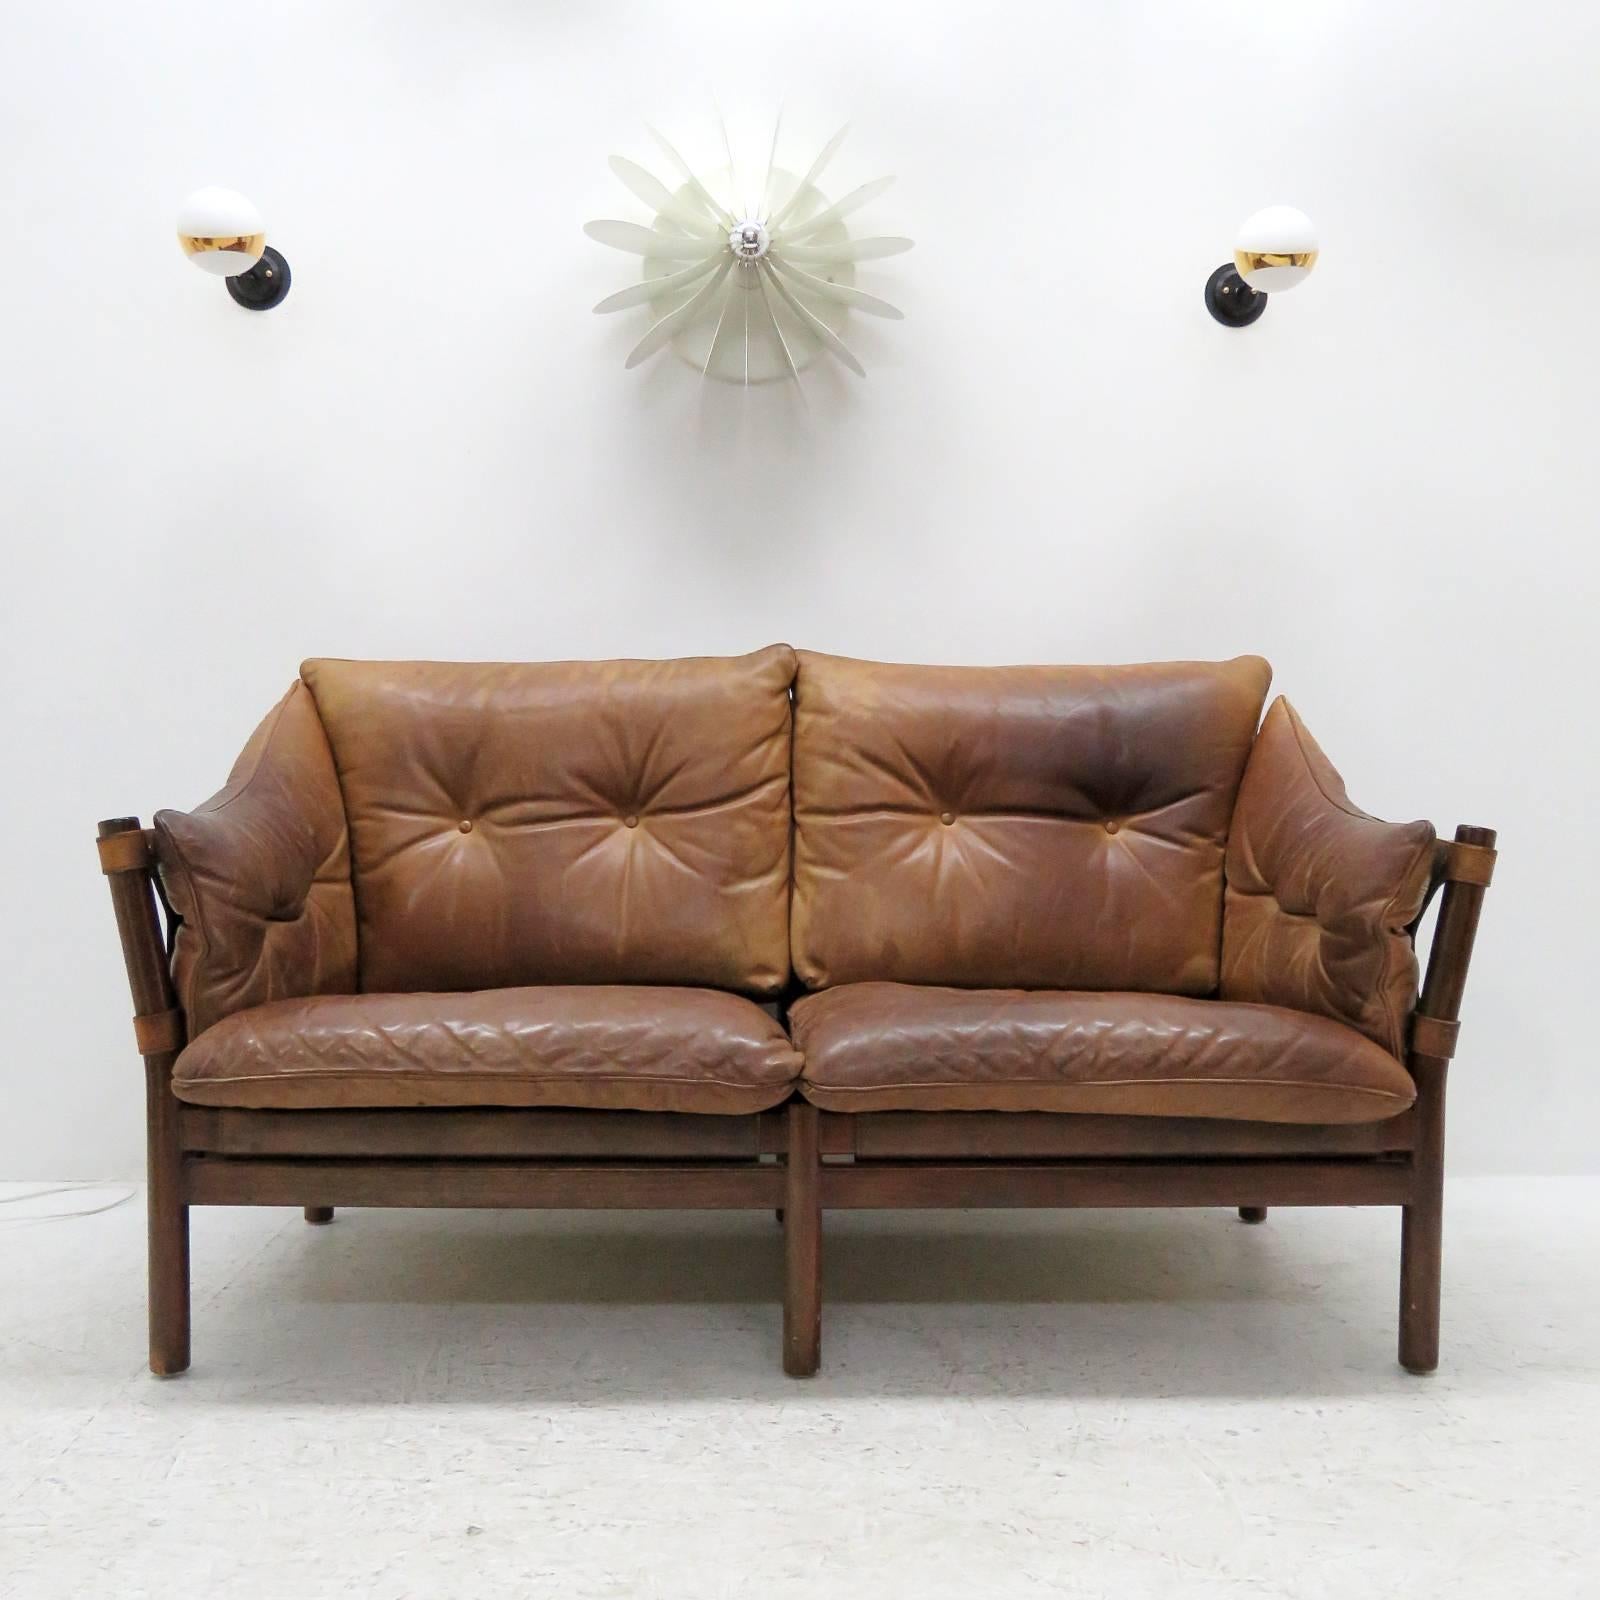 Stunning leather settee designed by Arne Norell in the early 1960s and produced by Norell Möbel AB, Sweden, with thick tufted leather cushions on saddle leather sling supports with brass hardware, the frame is made of sturdy, dark stained solid